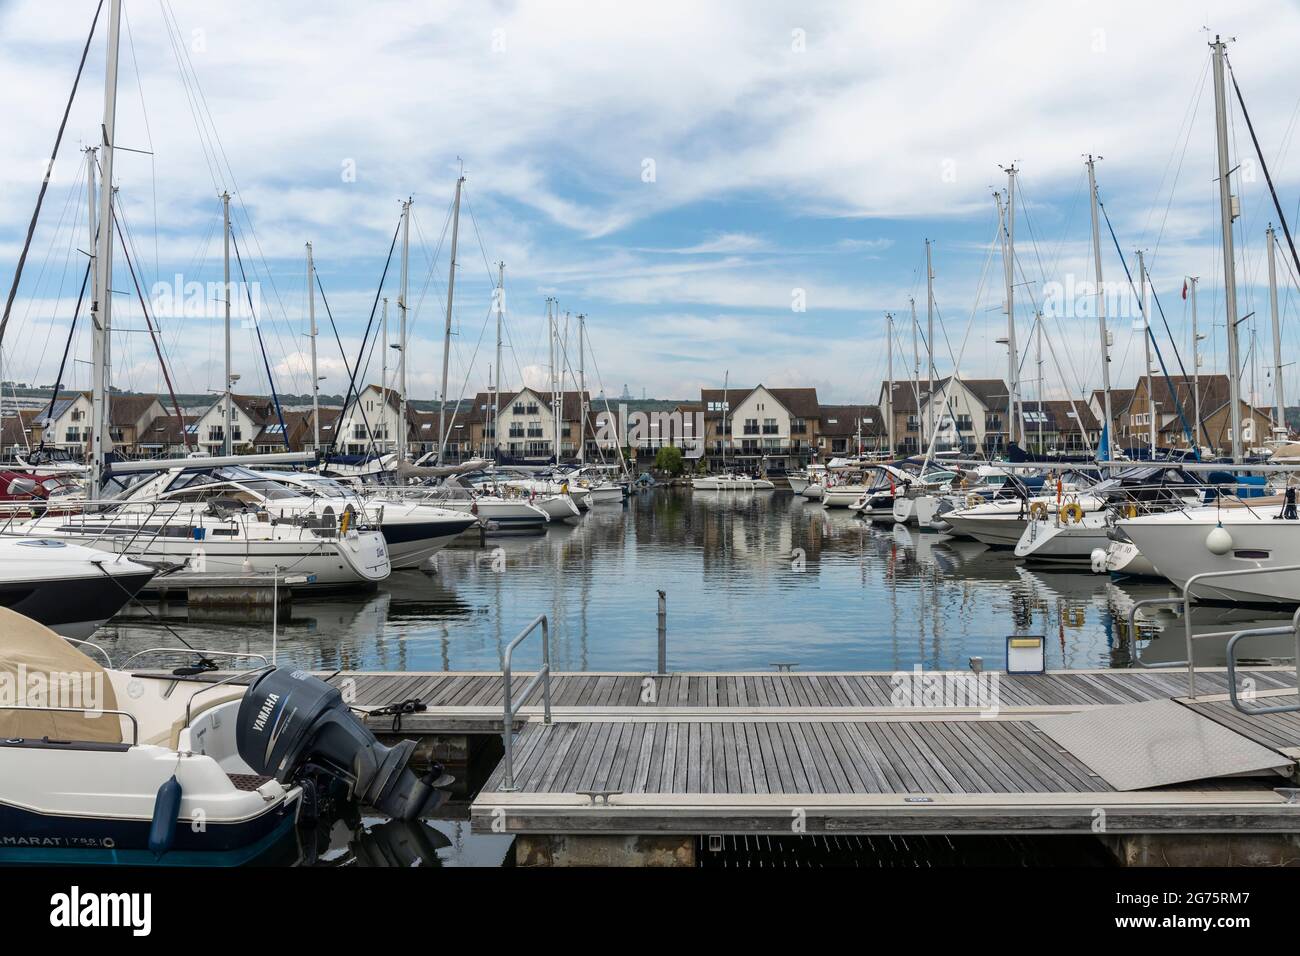 Jetty with Yachts moored in Port Solent Marina, Hampshire, England, UK Stock Photo